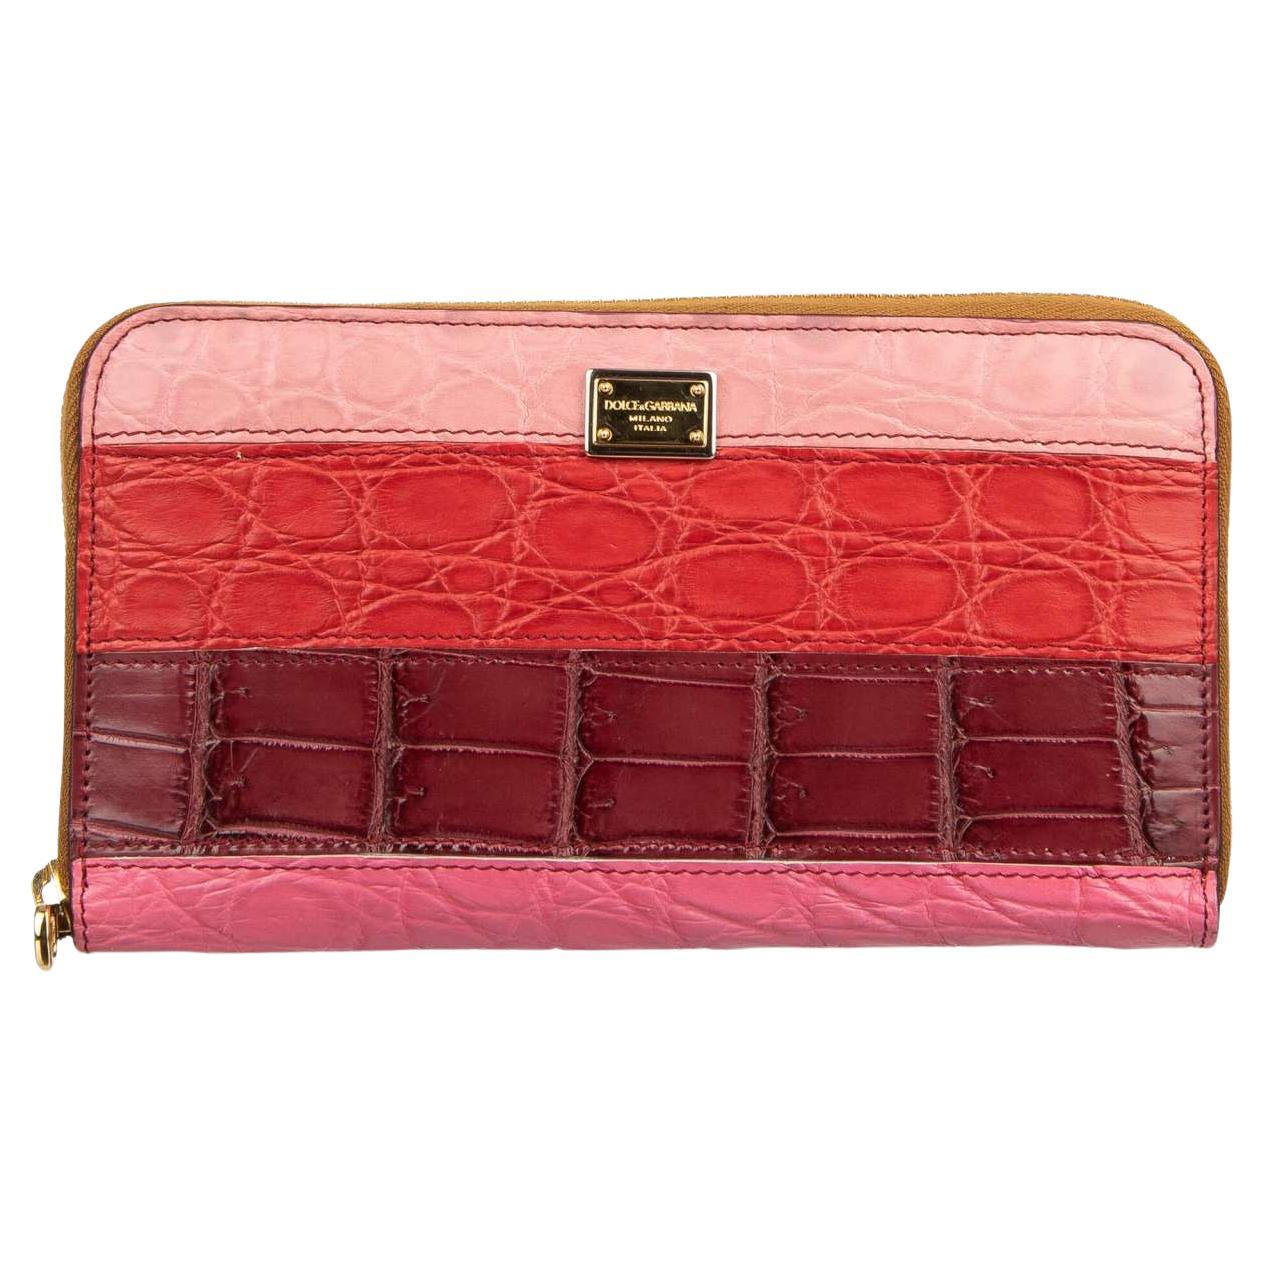 Dolce & Gabbana Striped Patchwork Crocodile Leather Zip-Around Wallet Red Pink For Sale